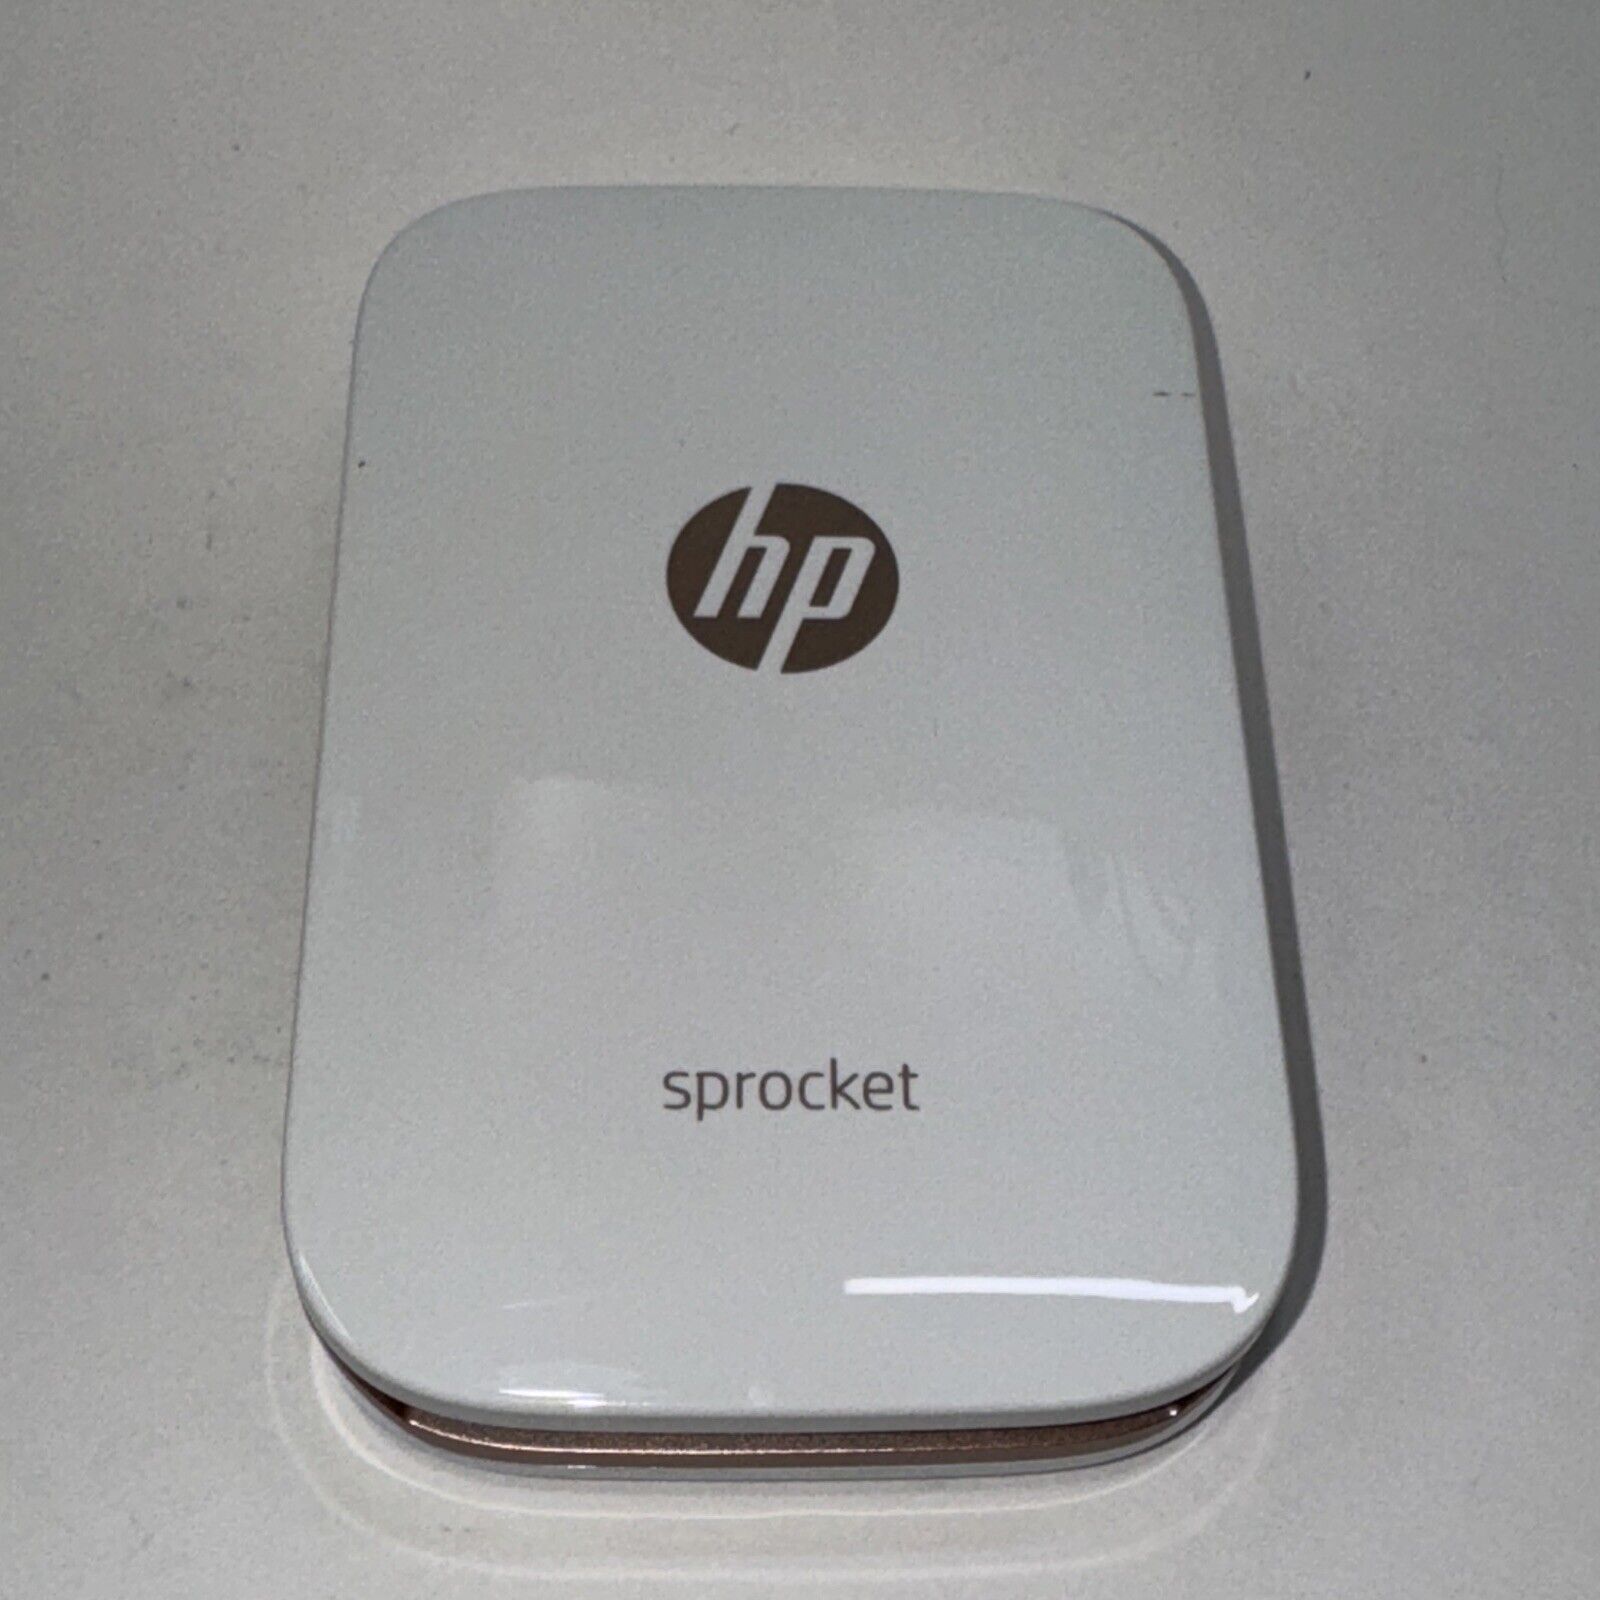 HP SPROCKET 100 Portable Photos Instantly Print 2 x 3 inch